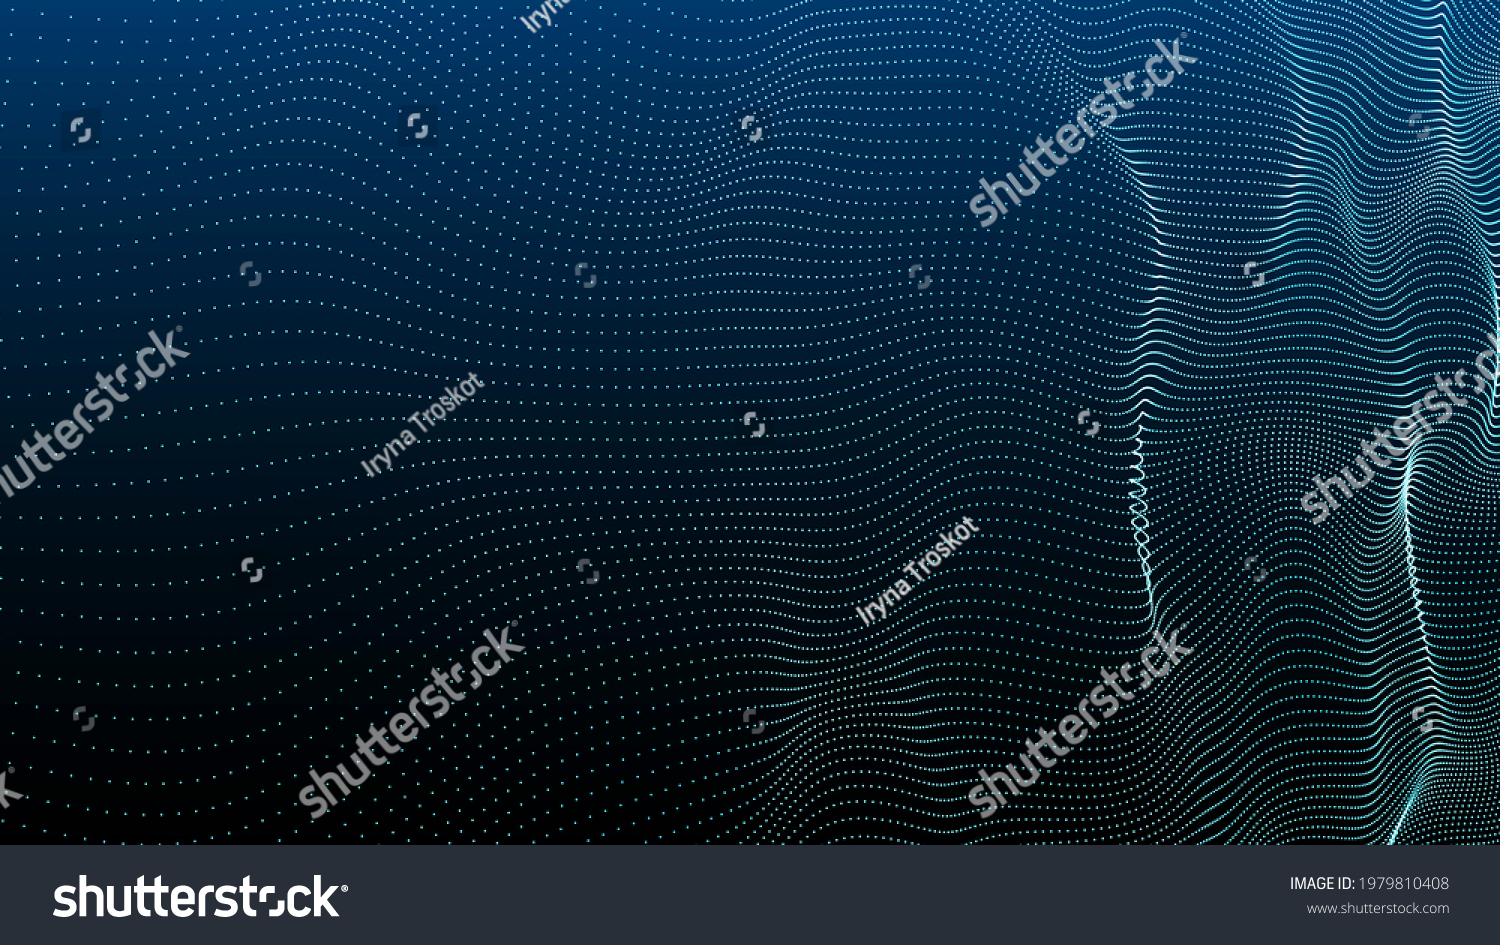 Abstract digital background. Futuristic wave of dots and weave lines. Digital technology. 3d rendering. #1979810408